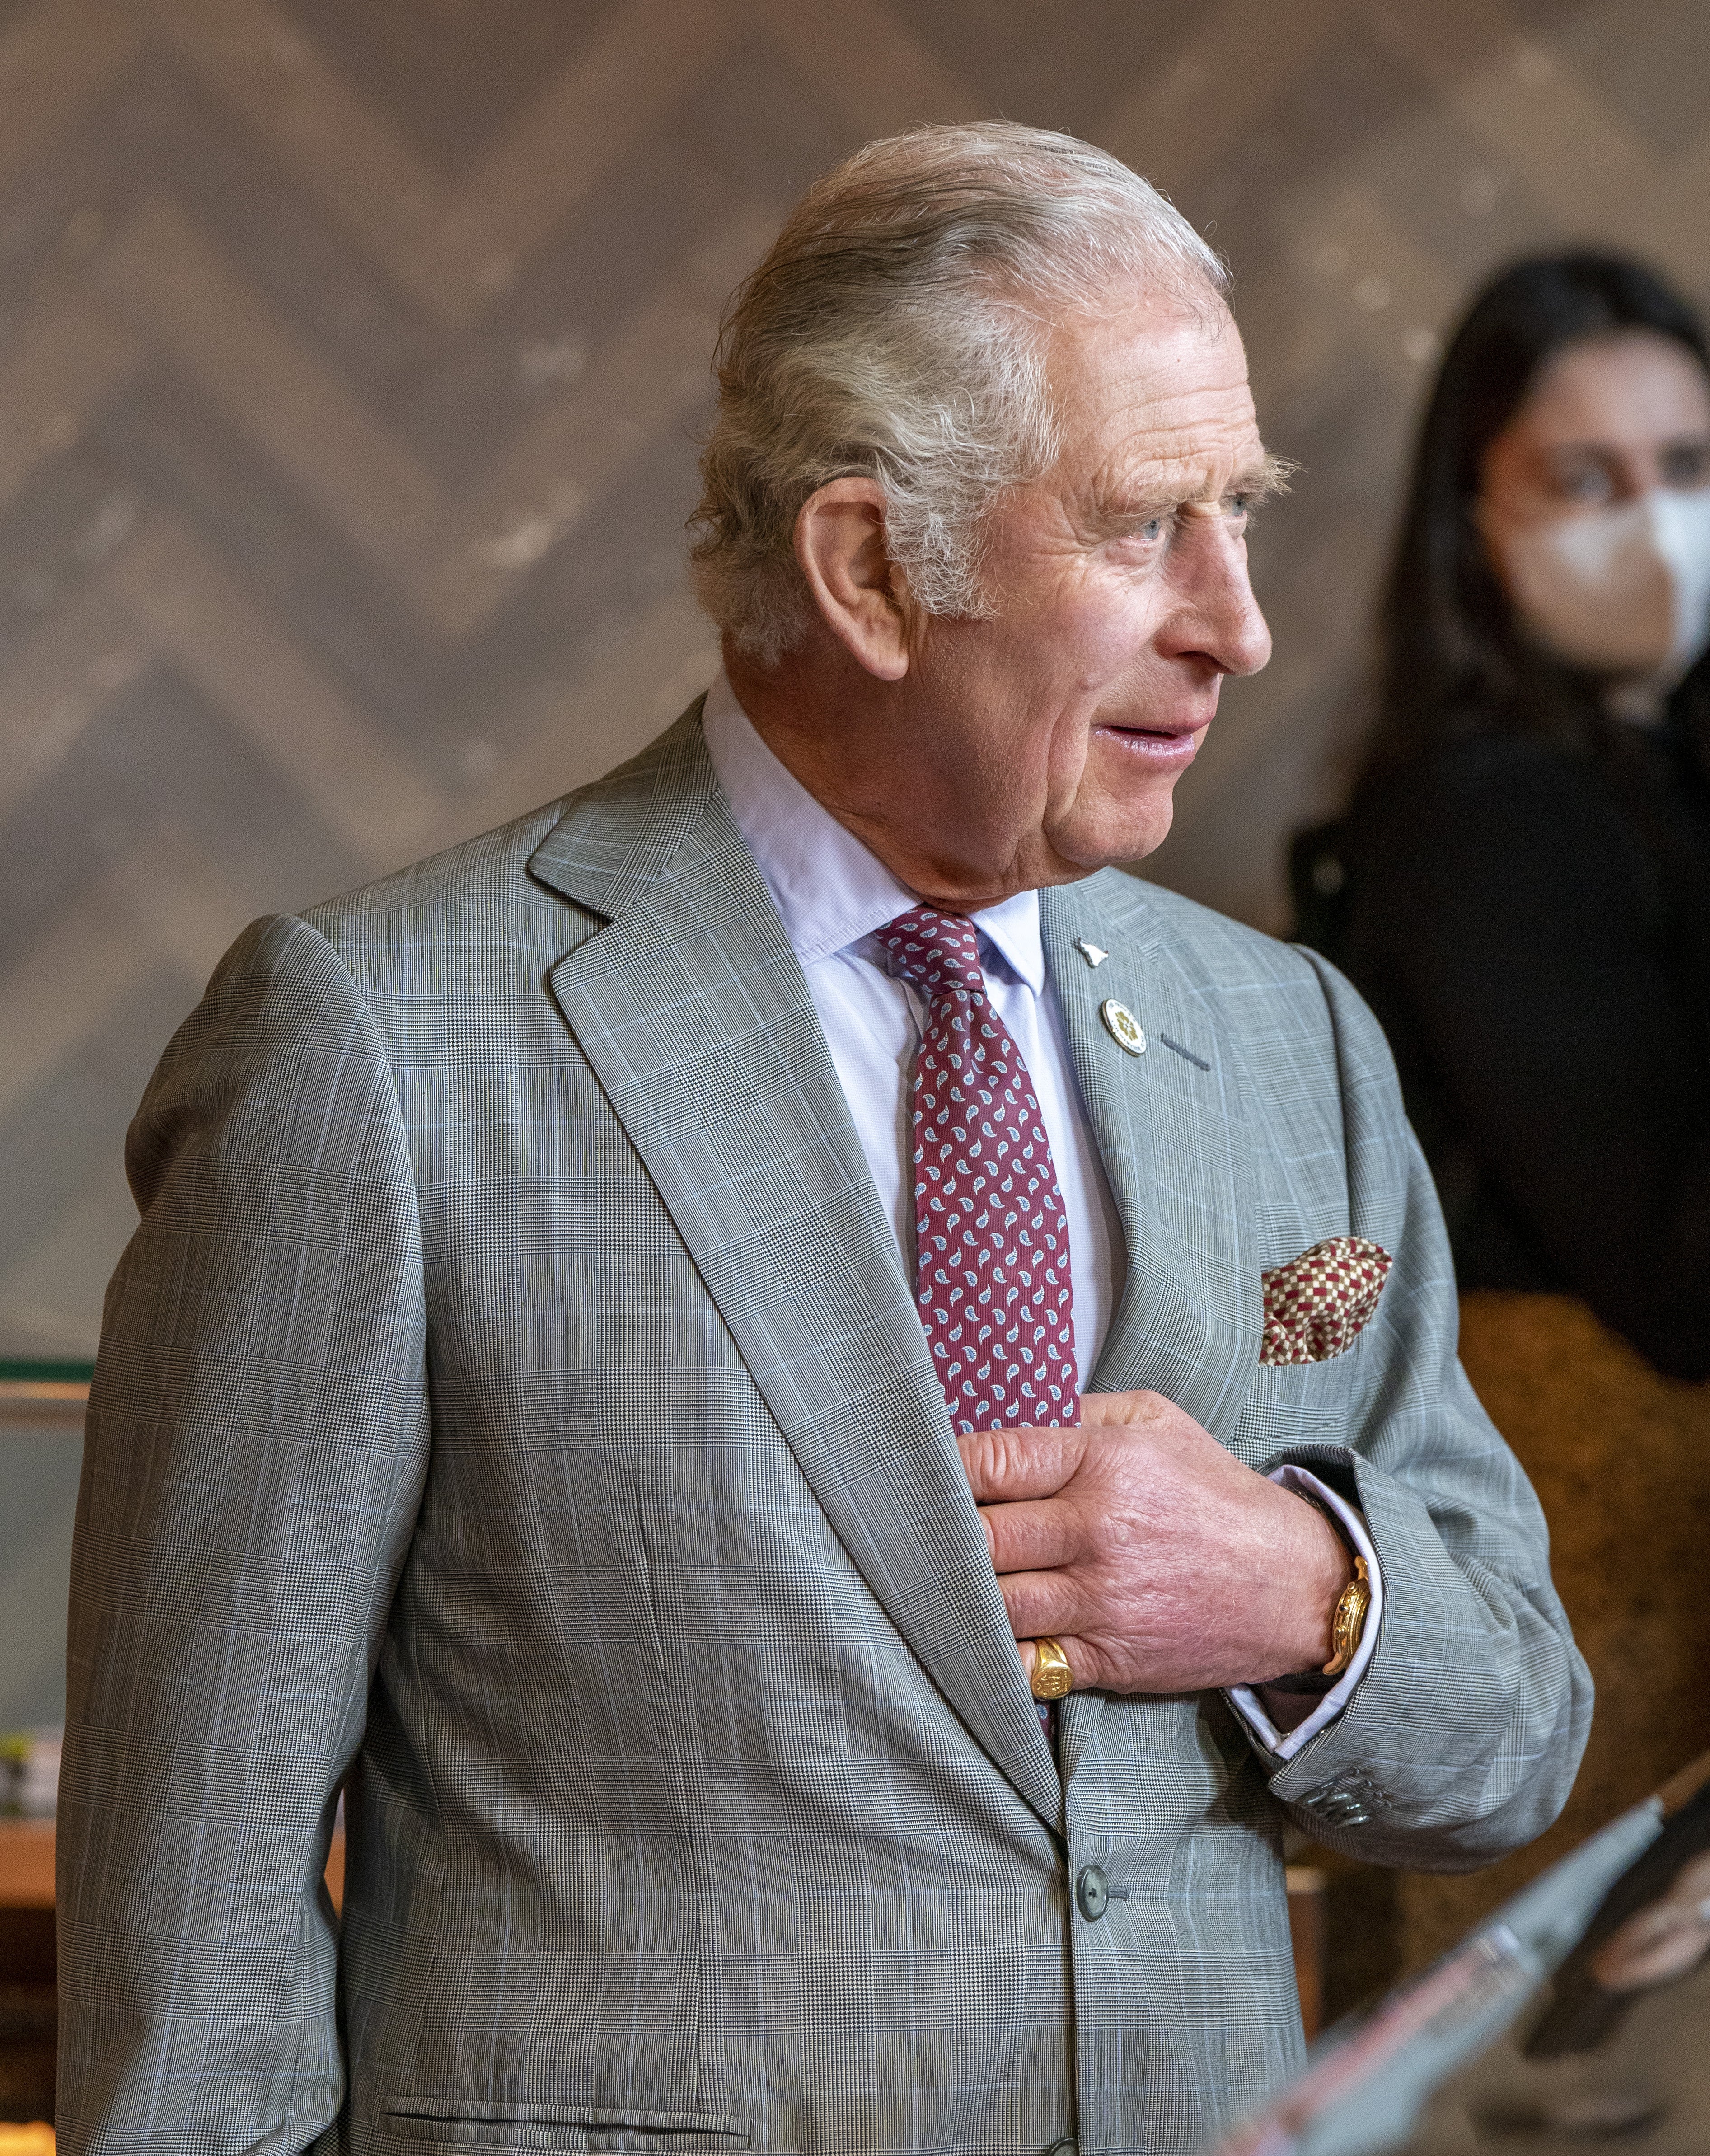 The Prince of Wales during a visit to Tebay Services in Cumbria to mark its 50th anniversary (Arthur Edwards/The Sun/PA)